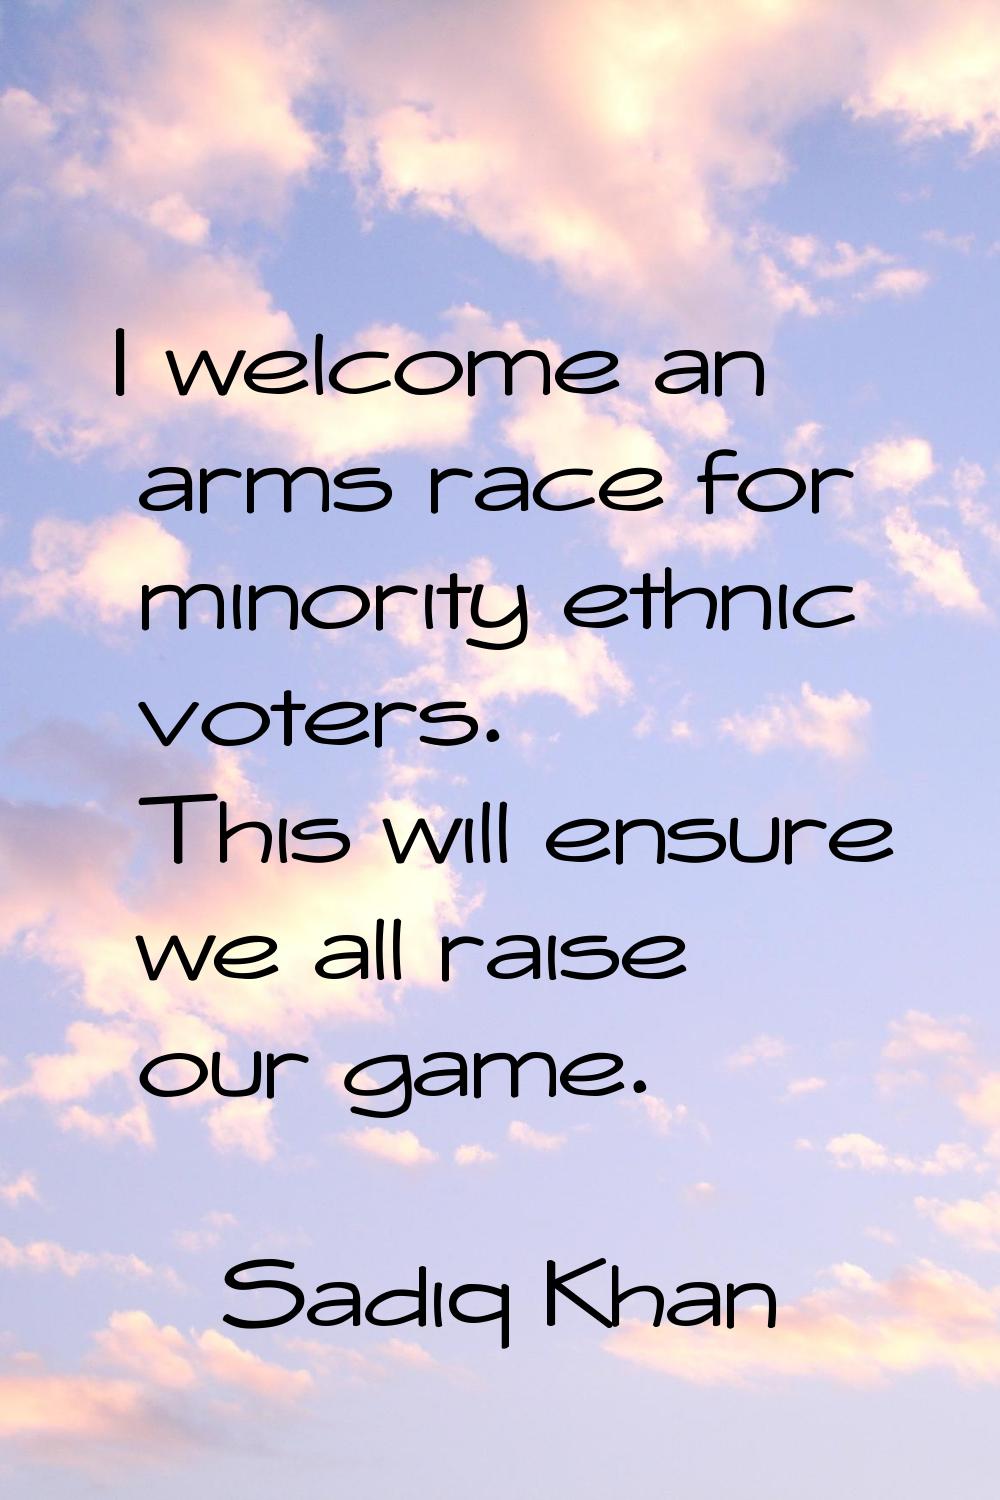 I welcome an arms race for minority ethnic voters. This will ensure we all raise our game.